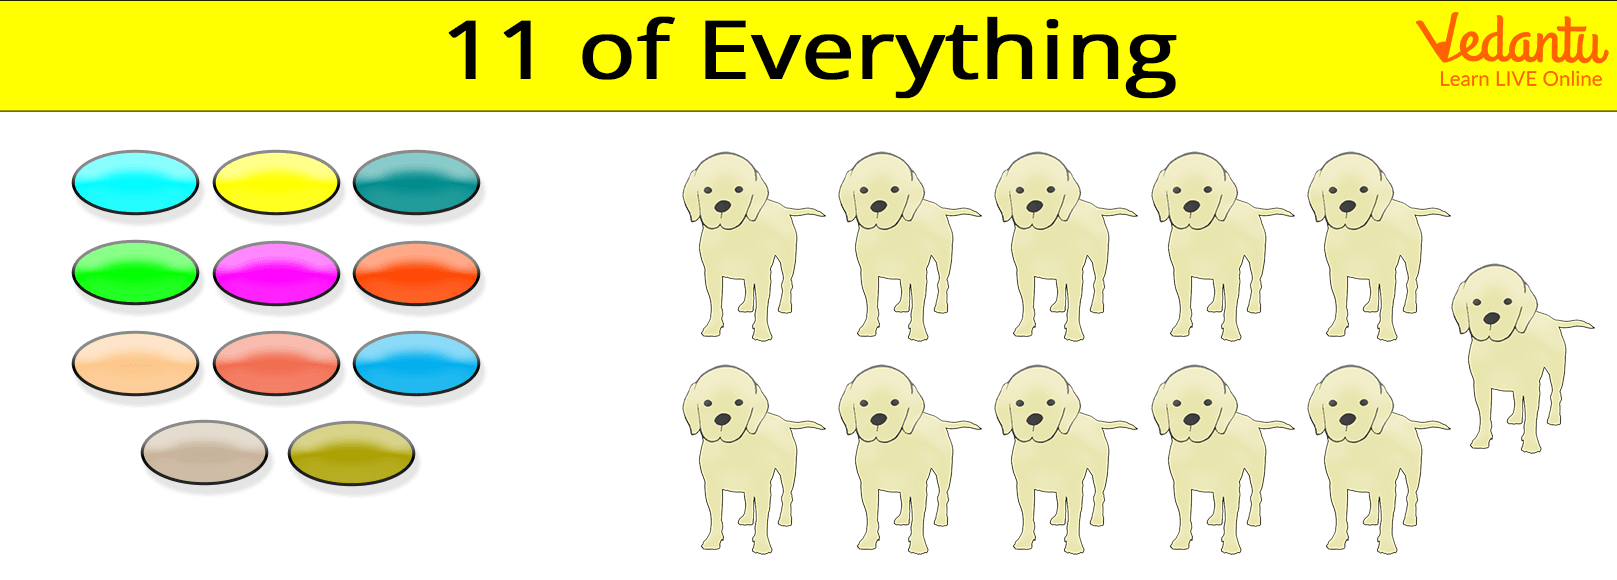 Examples of Eleven: 11 candies and 11 dogs